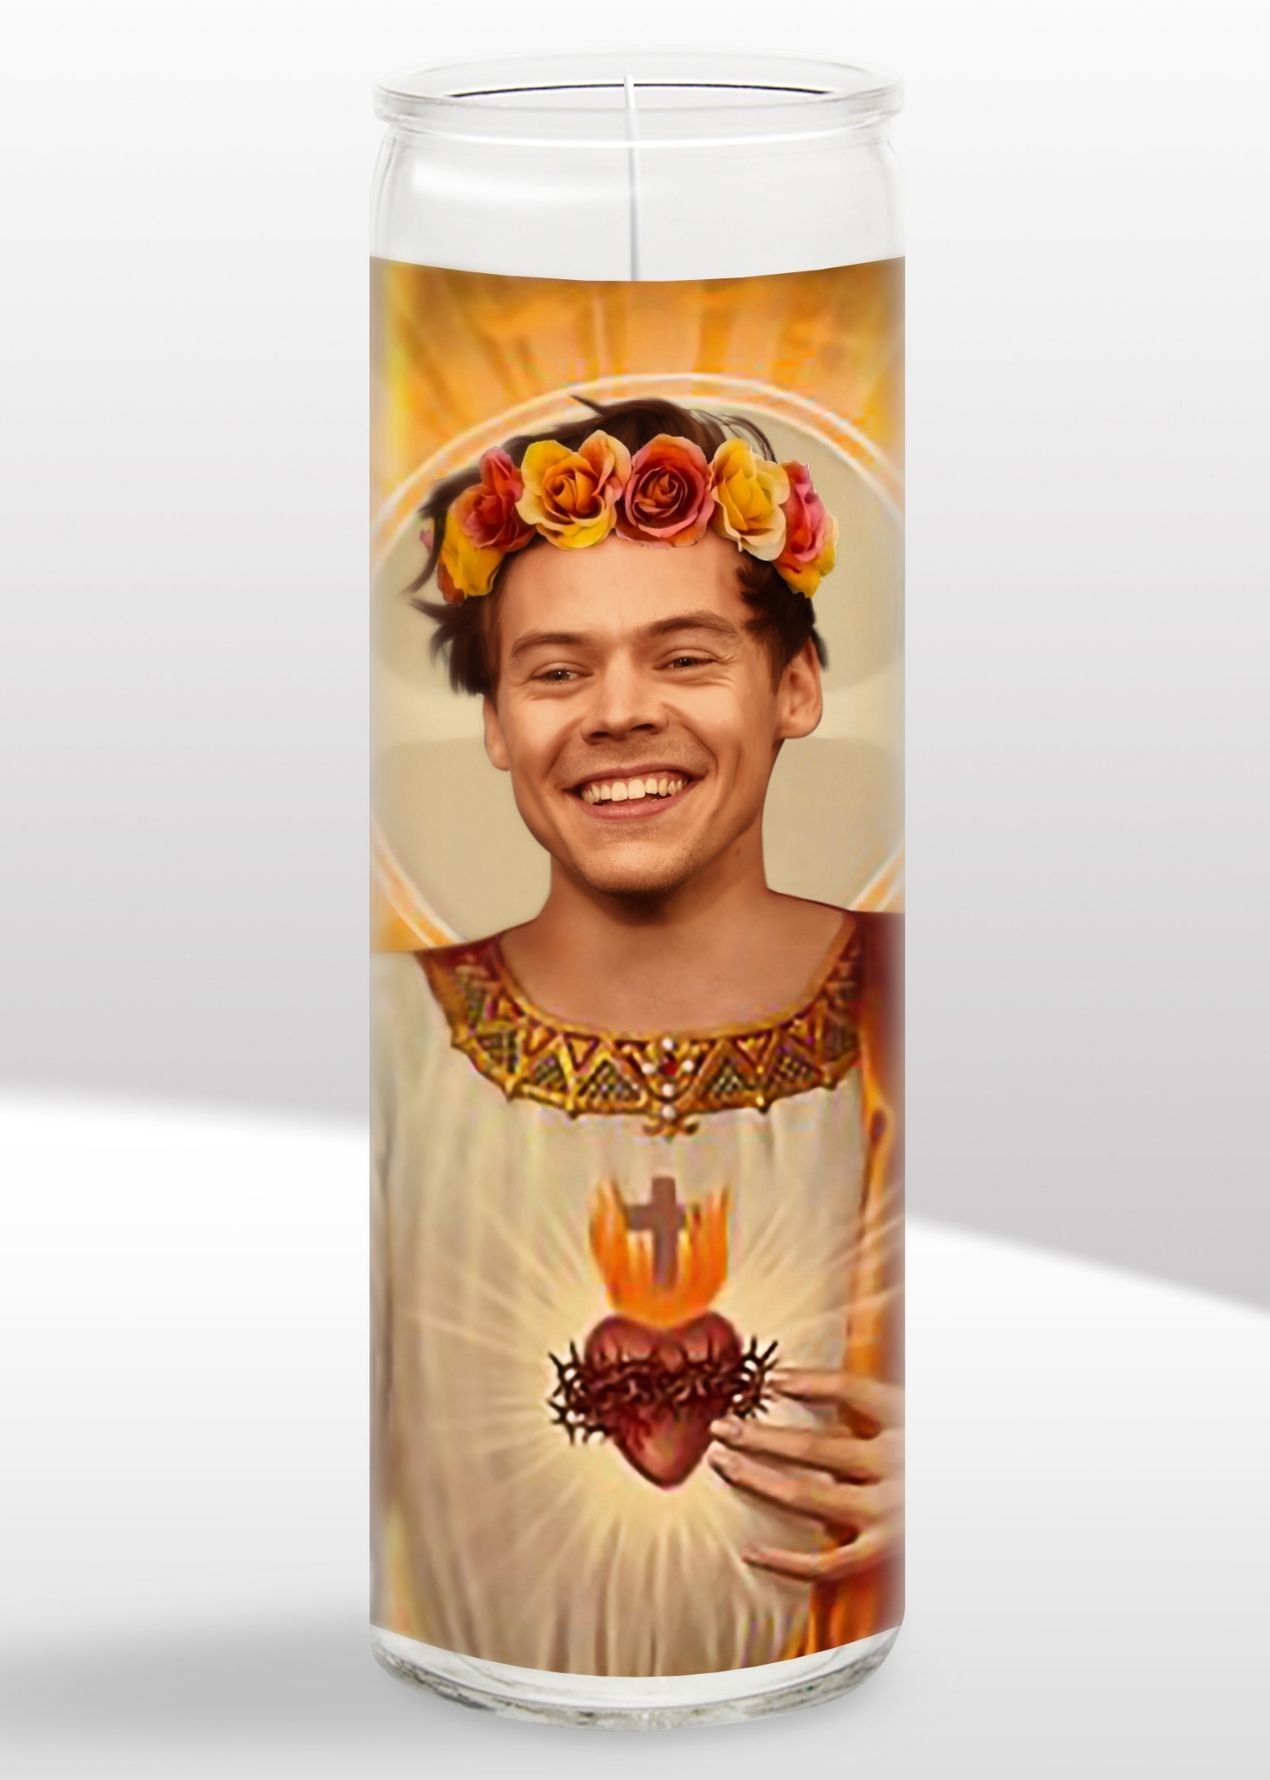 Harry Styles Candle